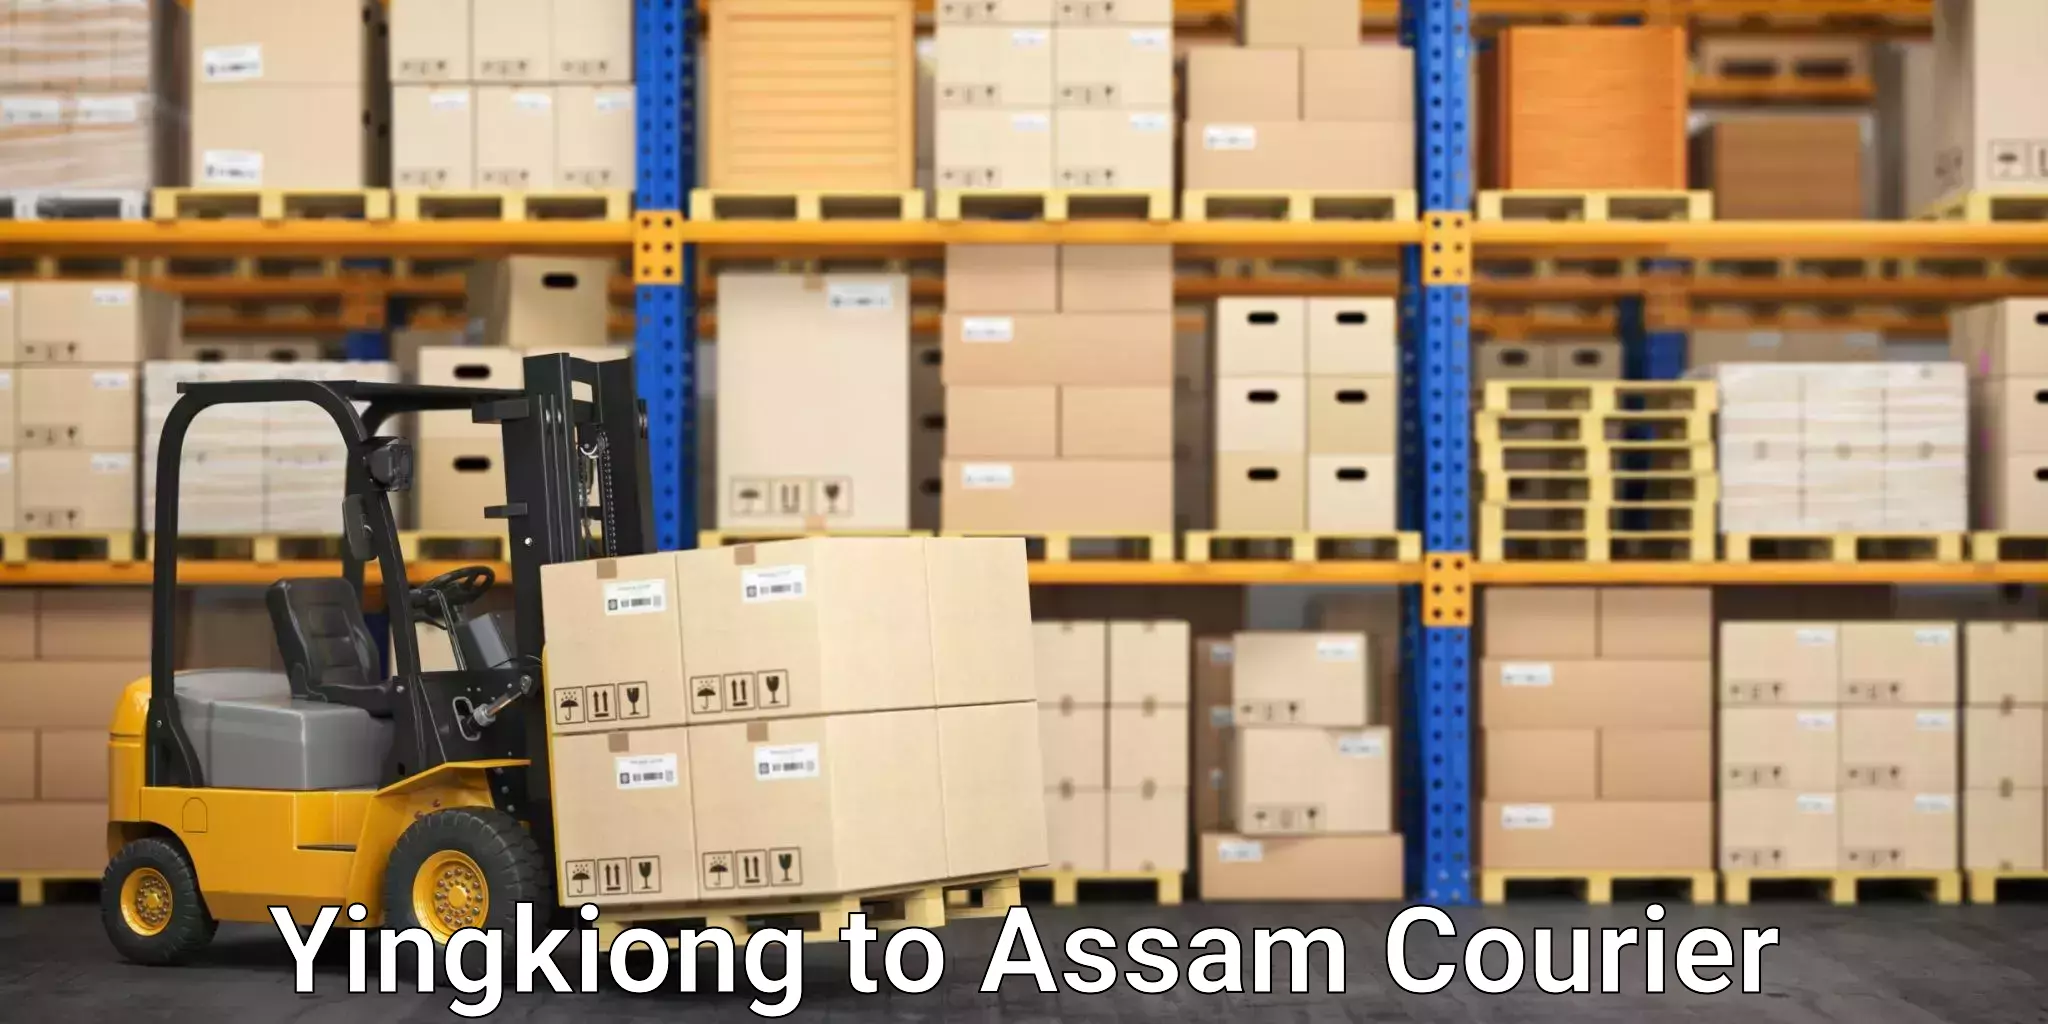 Full-service courier options Yingkiong to Lala Assam